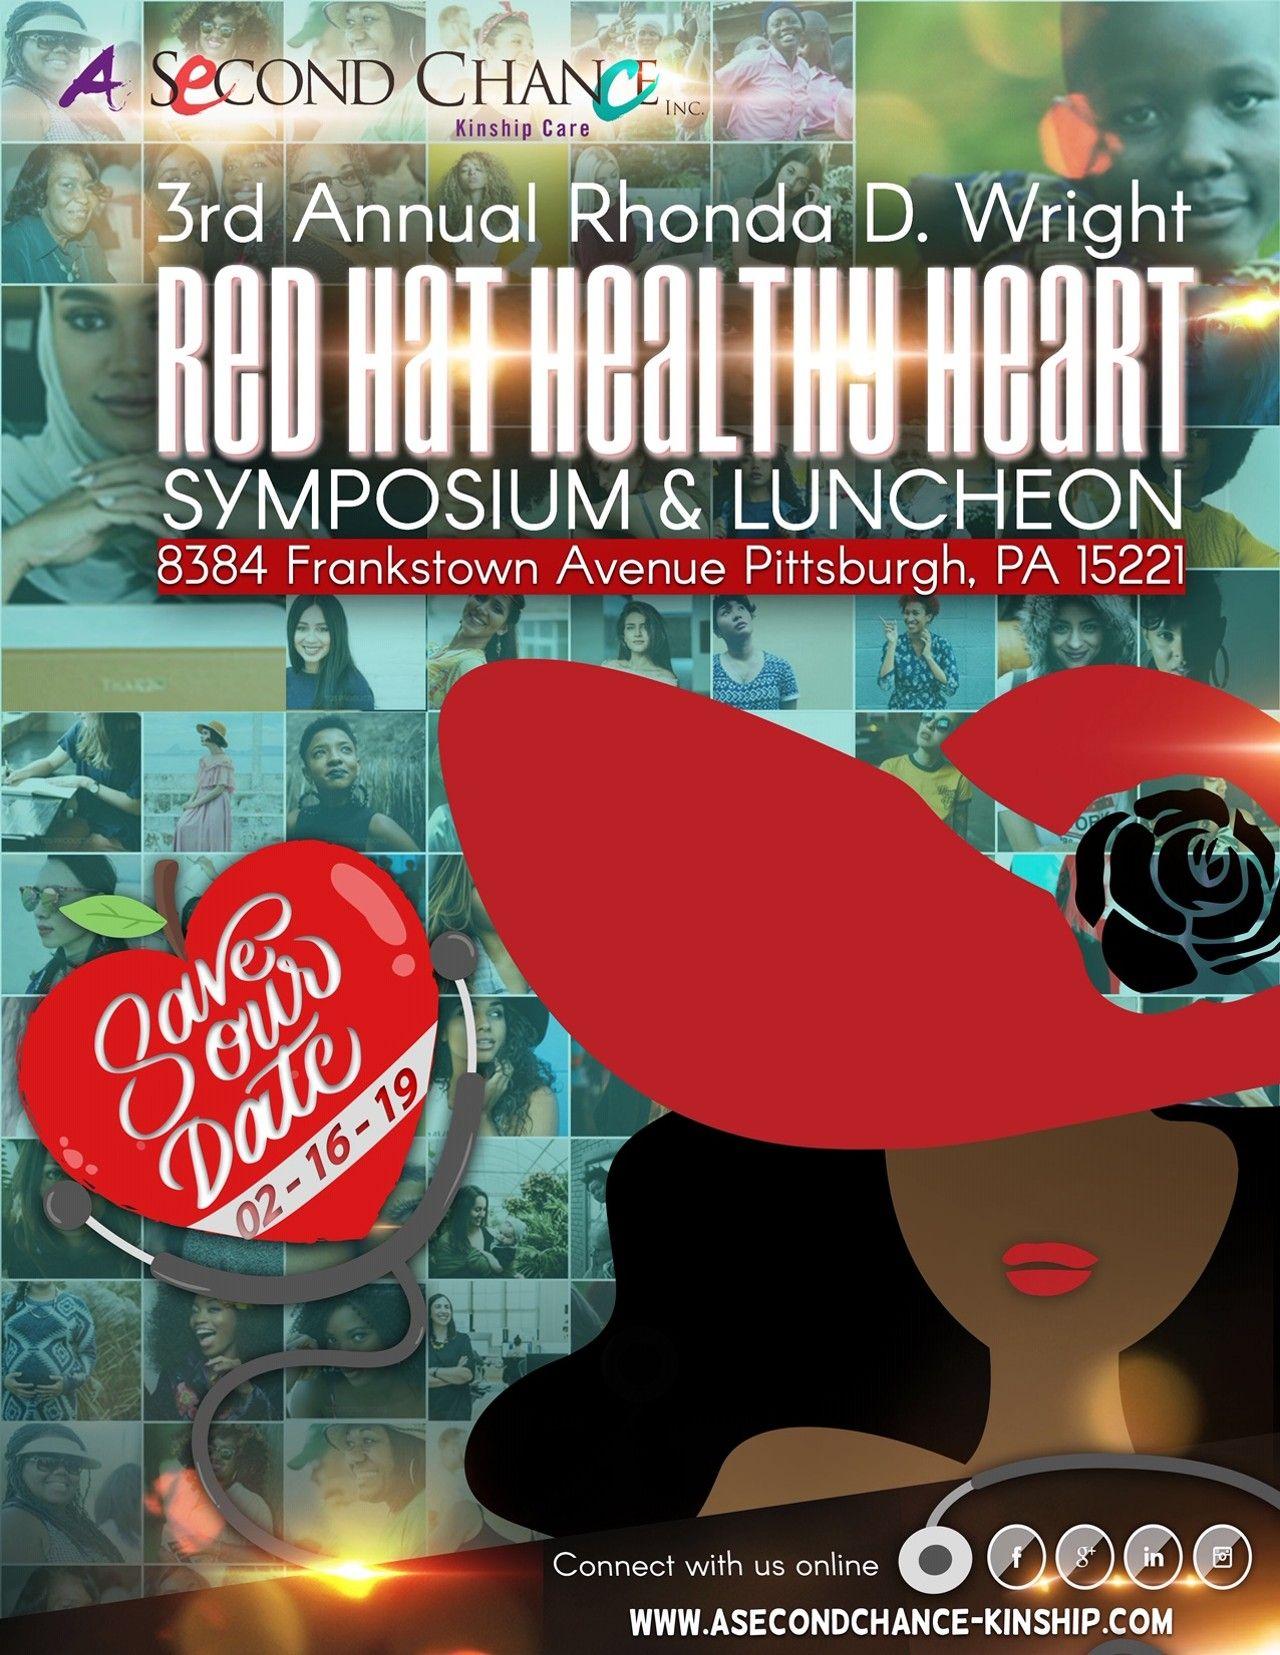 Heart Food and Drink Logo - 3rd Annual Rhonda D. Wright Red Hat Healthy Heart Symposium